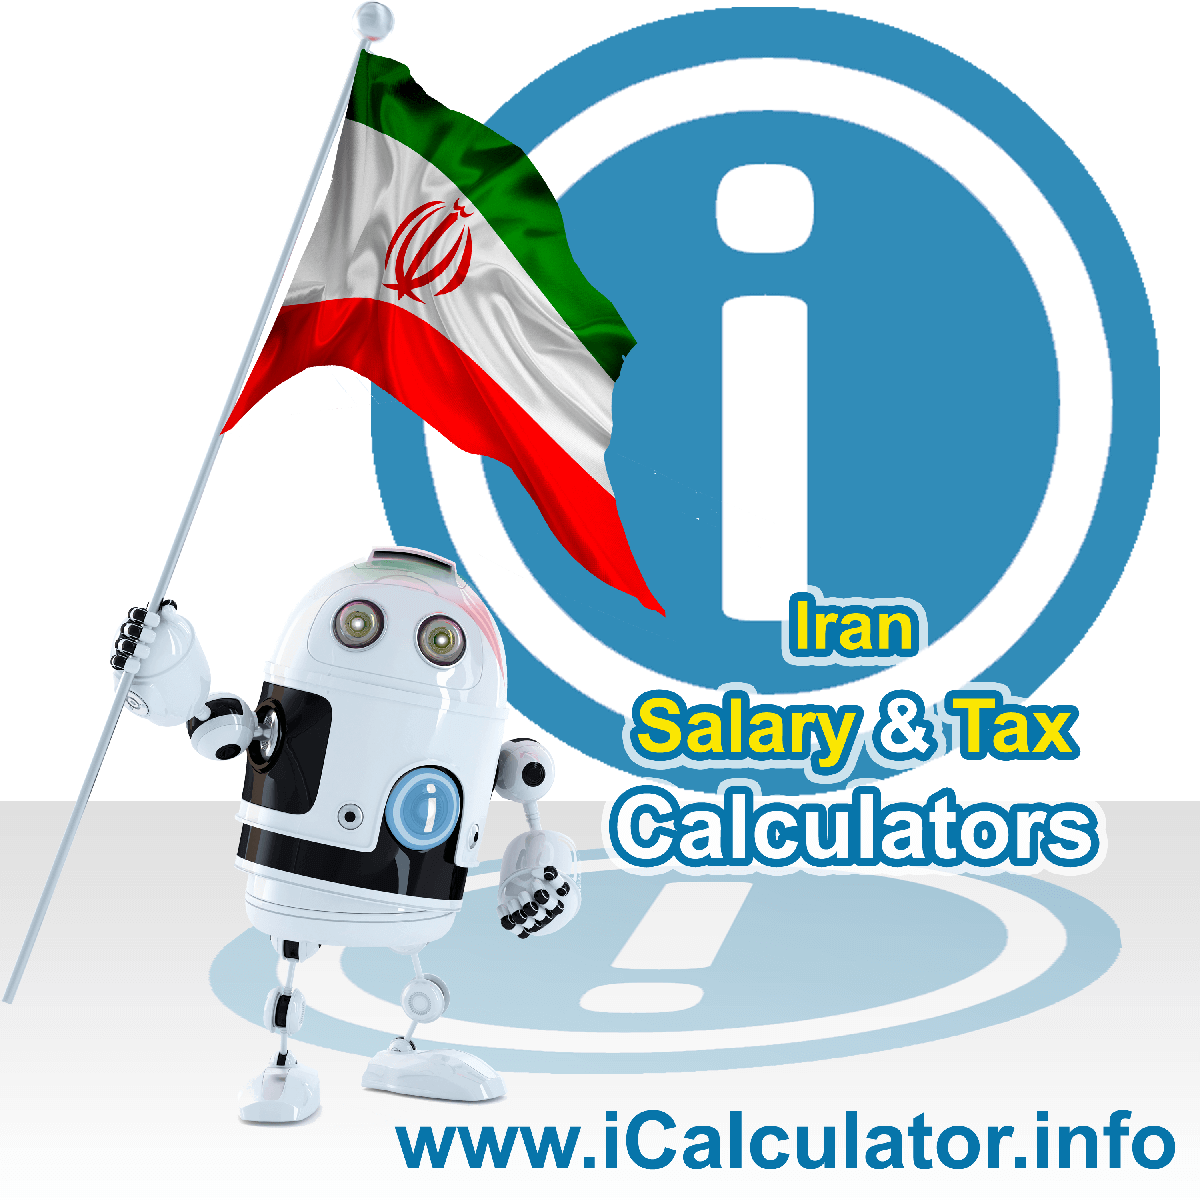 Iran Wage Calculator. This image shows the Iran flag and information relating to the tax formula for the Iran Tax Calculator